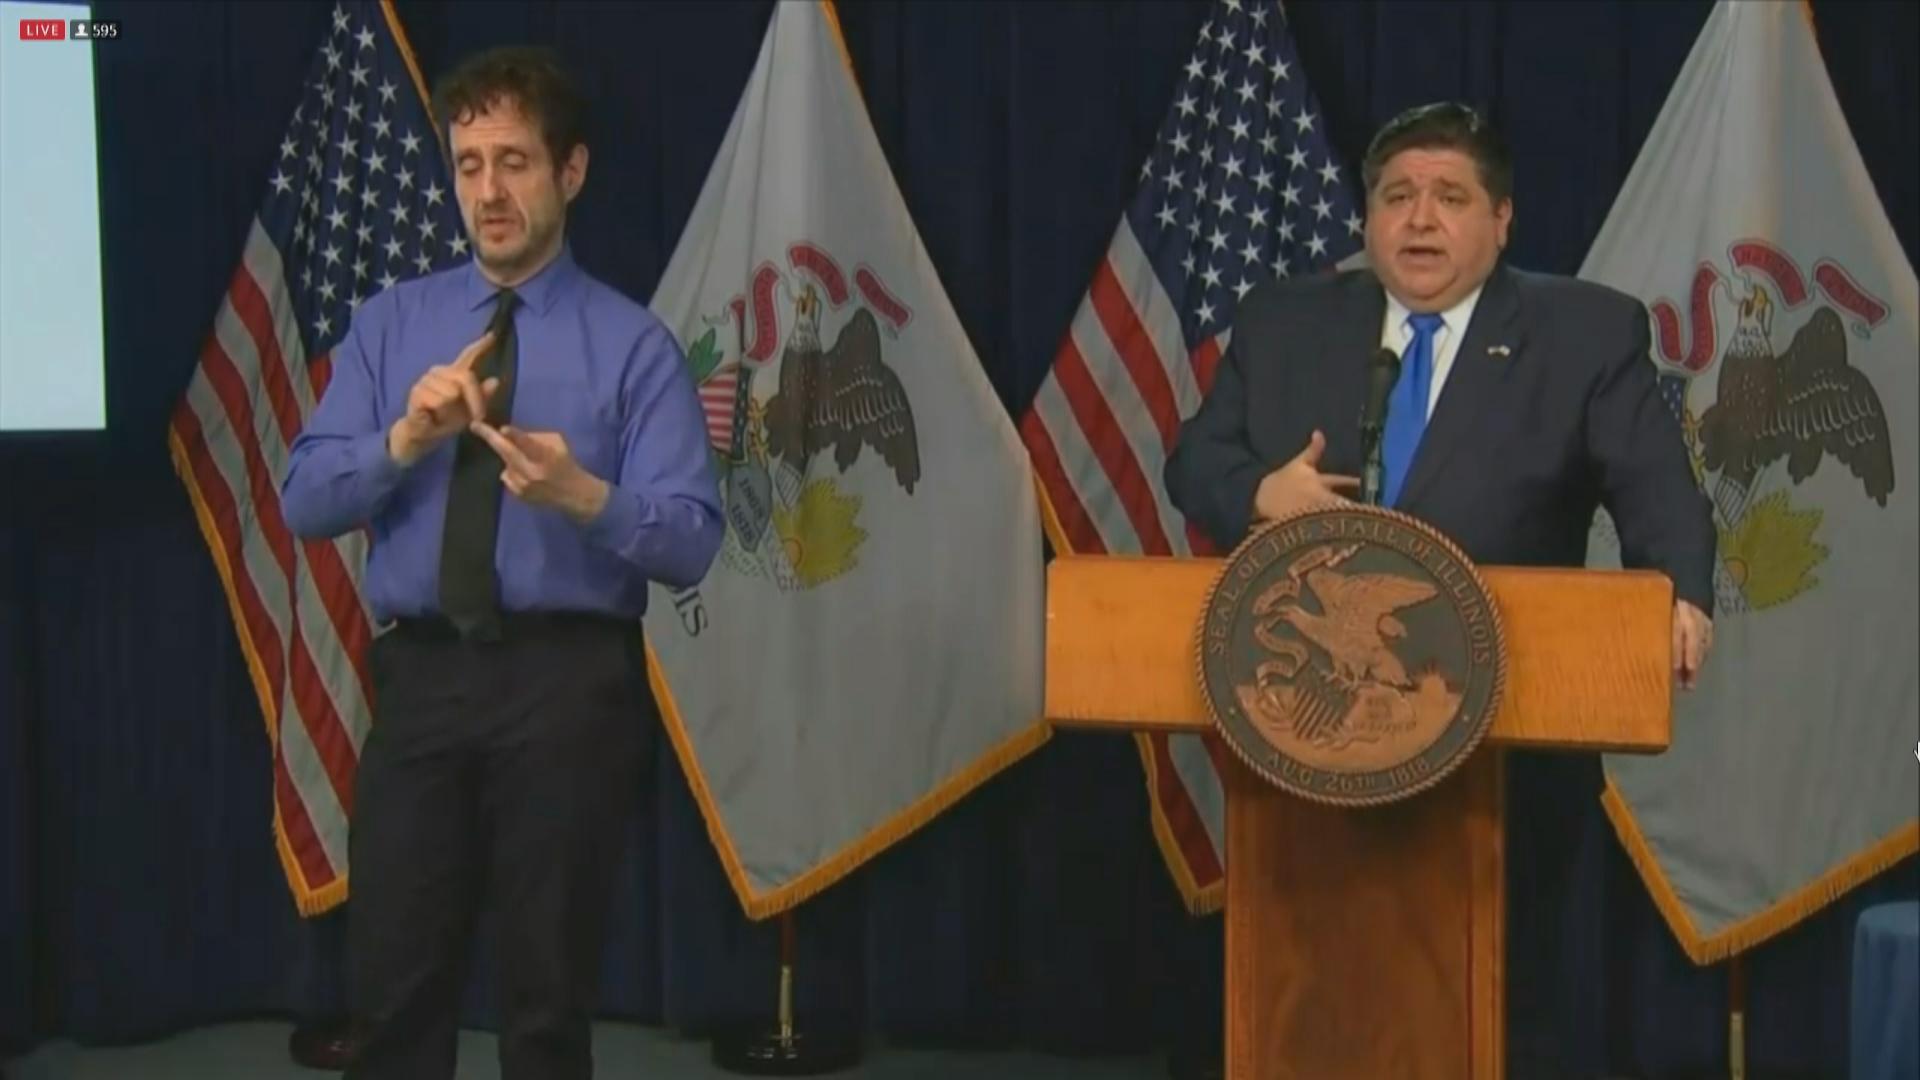 Gov. J.B. Pritzker speaks Monday, Nov. 30, 2020 about the spread of COVID-19 in Illinois. (WTTW News)